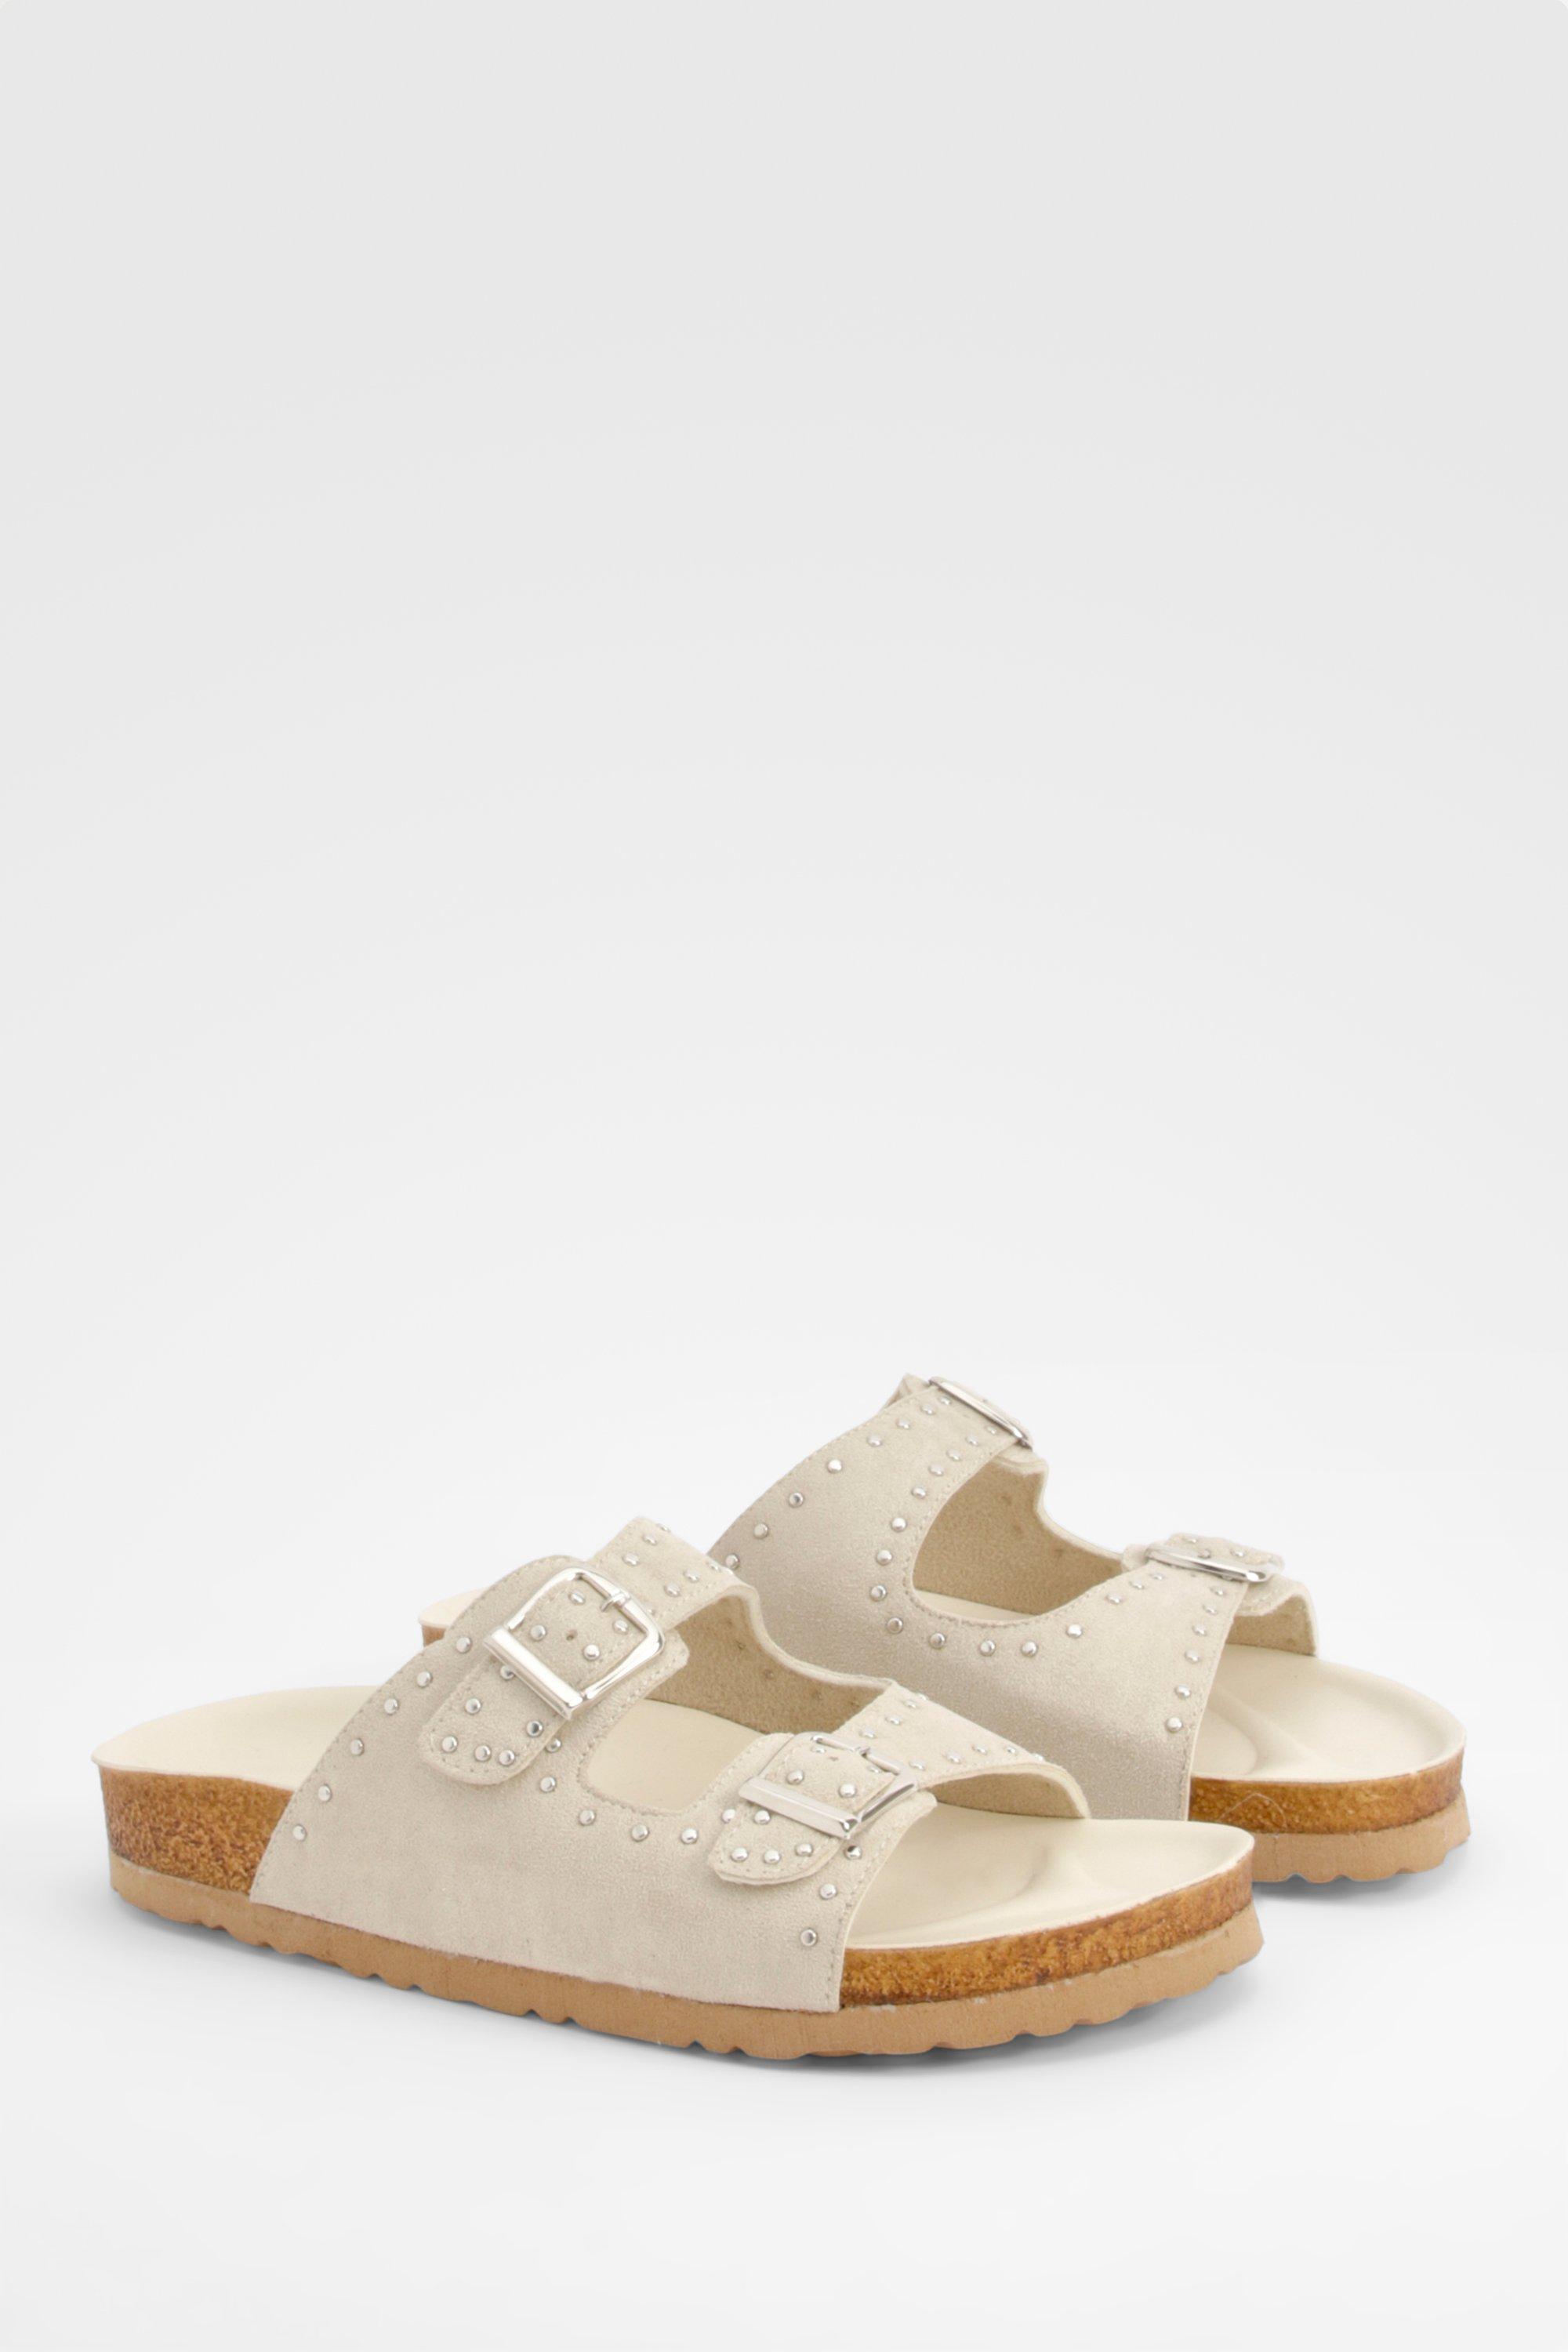 Image of Wide Fit Studded Double Buckle Footbed Sliders, Cream